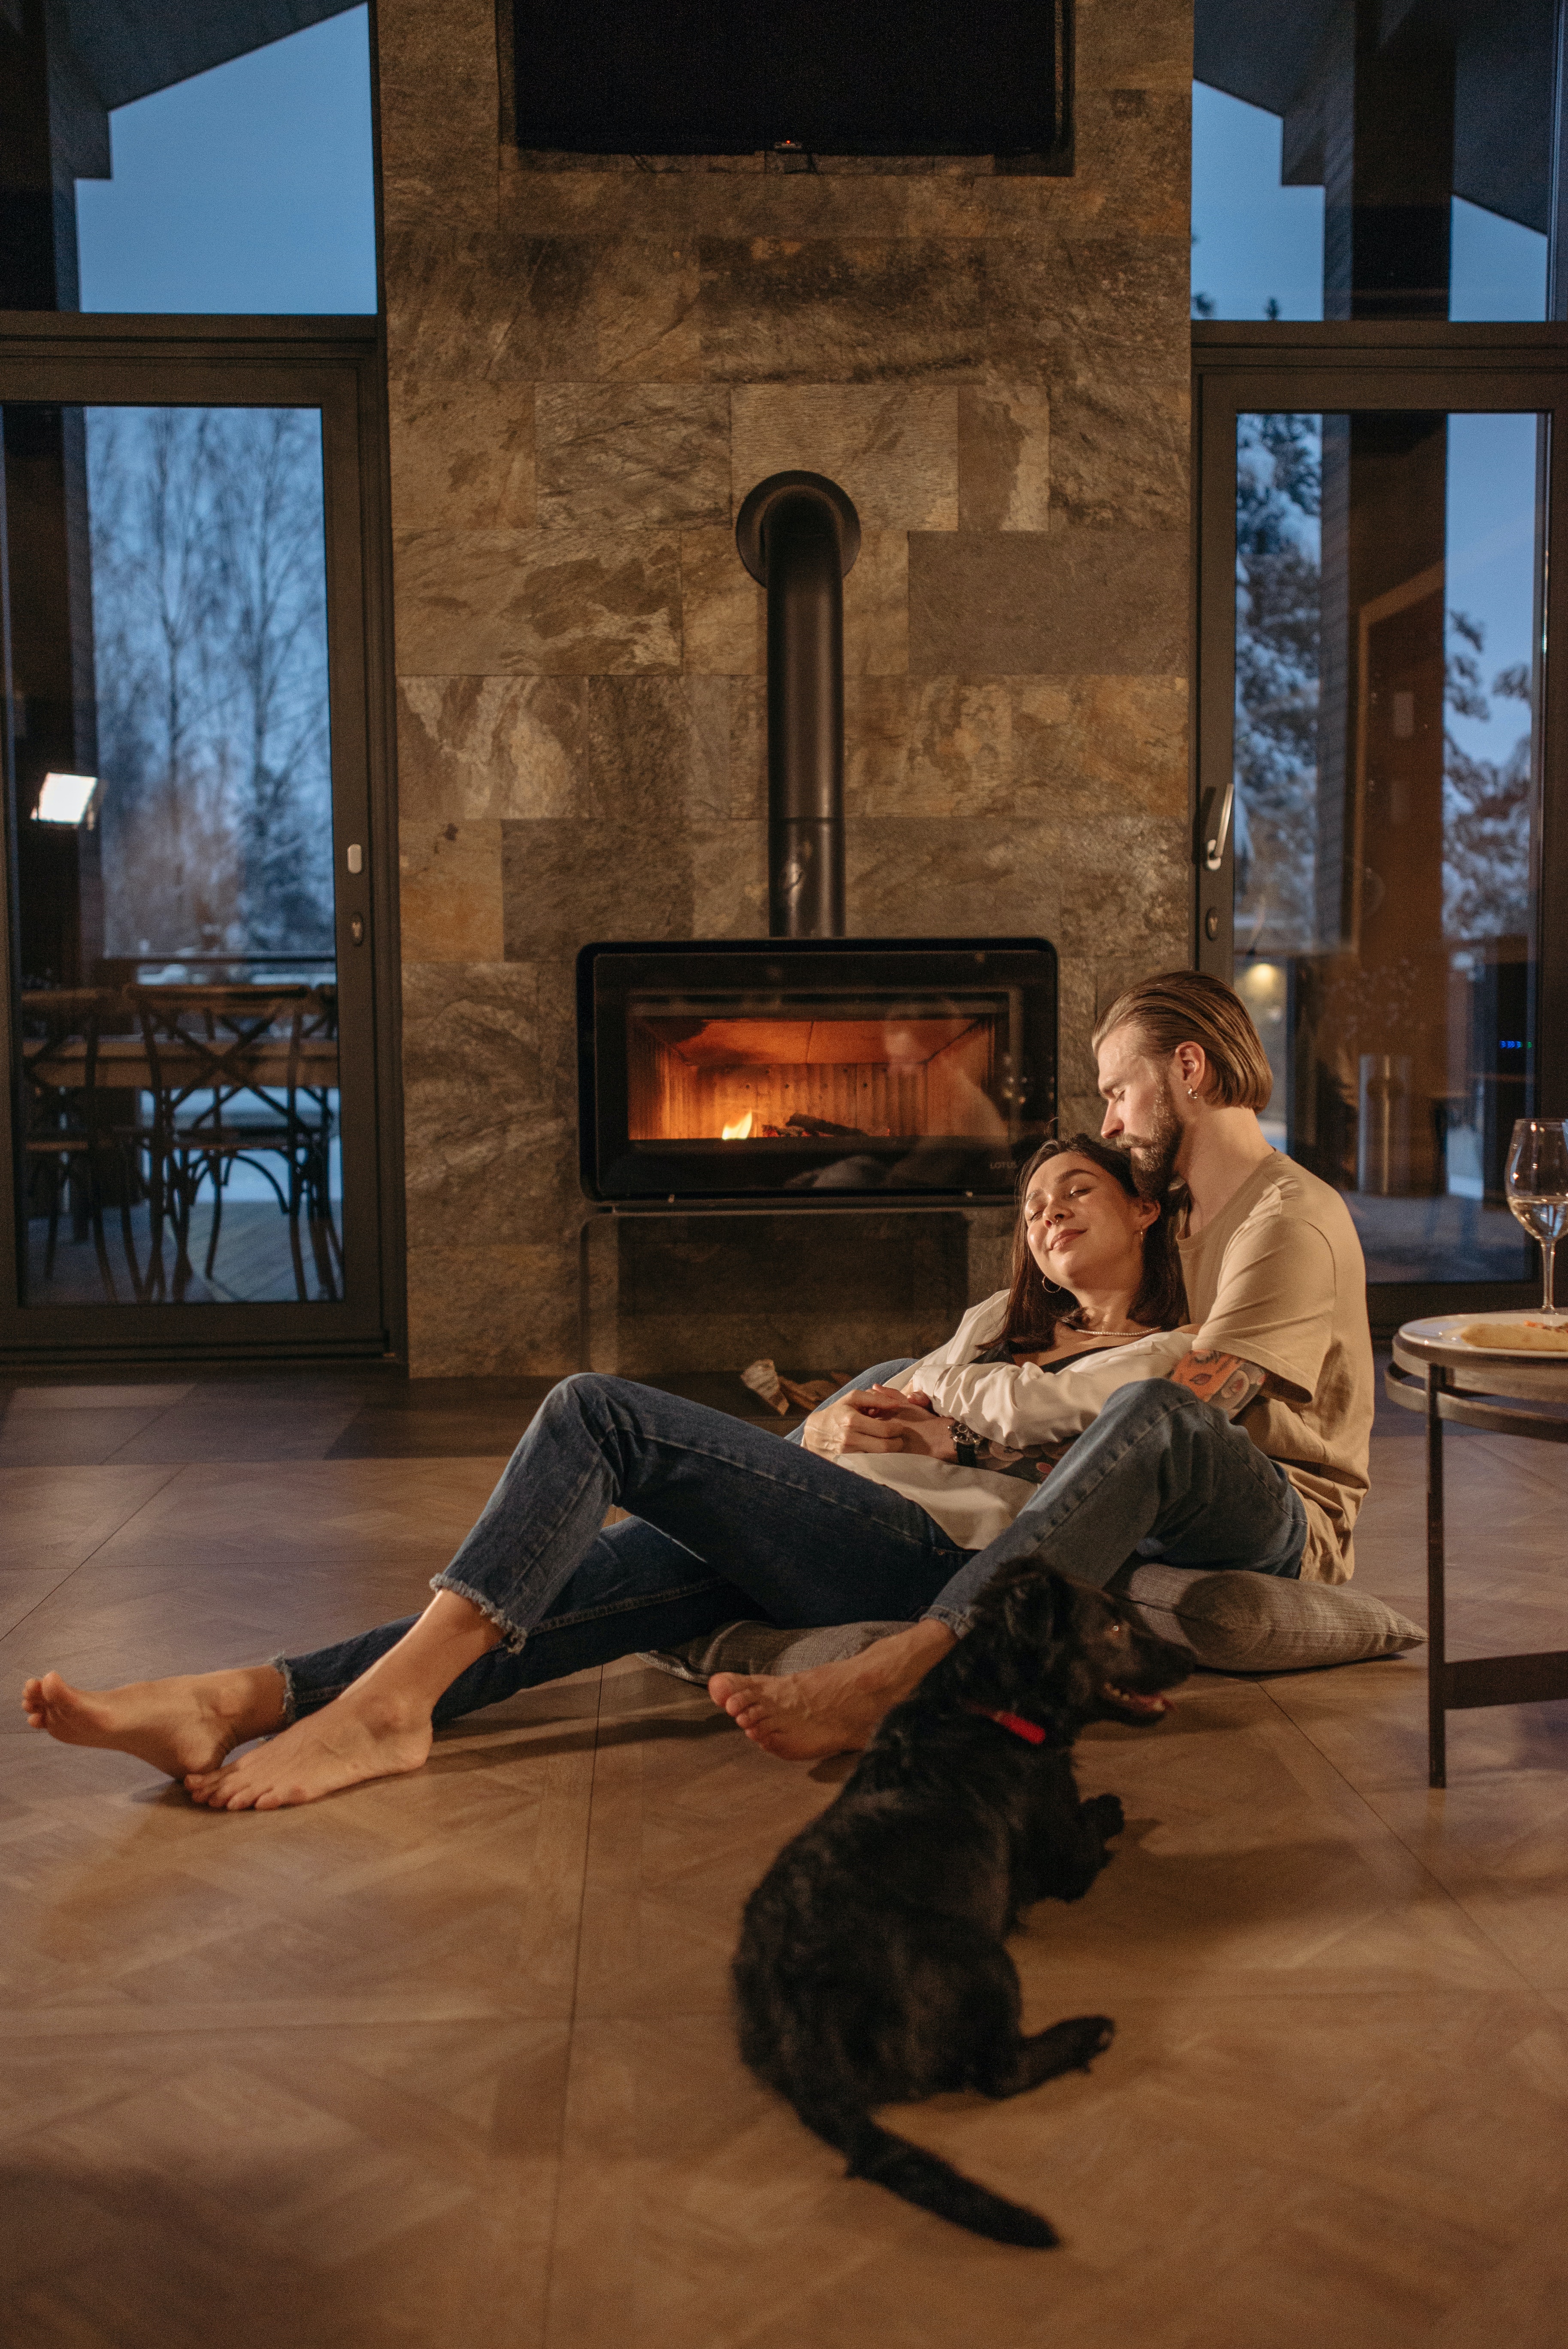 A couple relaxing by a fire. | Source: Pexels